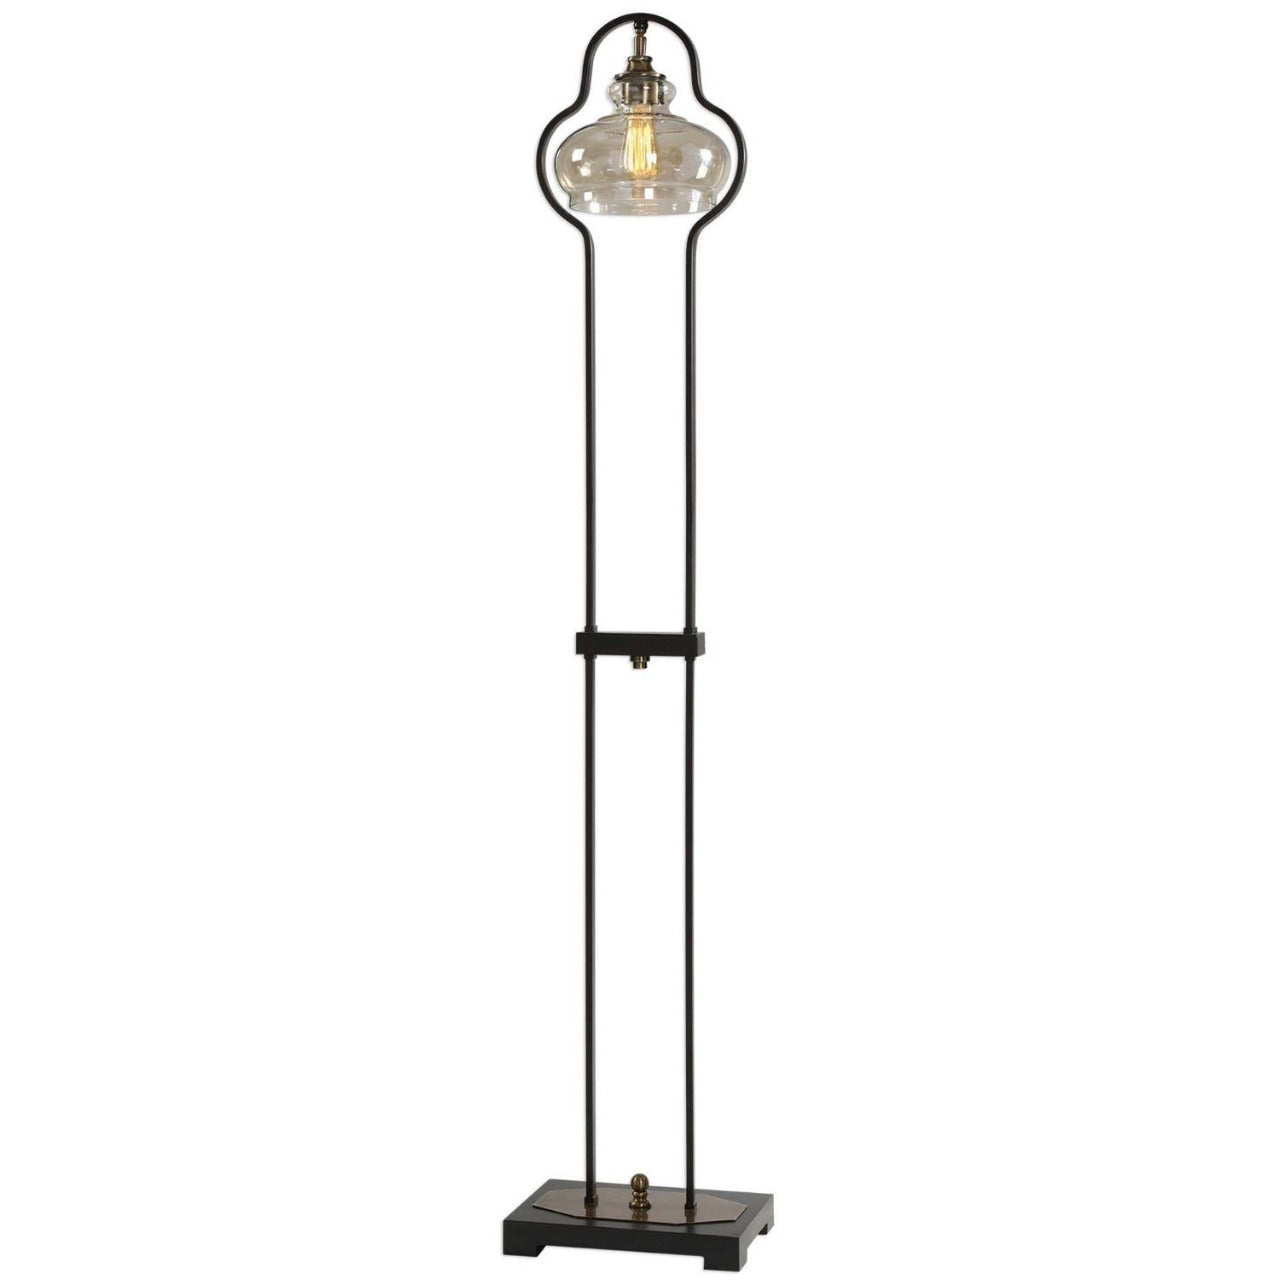 Mindy Brownes Cotulla Lamp  Curvaceous forged iron finished in an aged black, following the contour of the light amber glass shade, accented with brushed, antiqued brass plated details. 60 watt, BT-58 antique style bulb included.